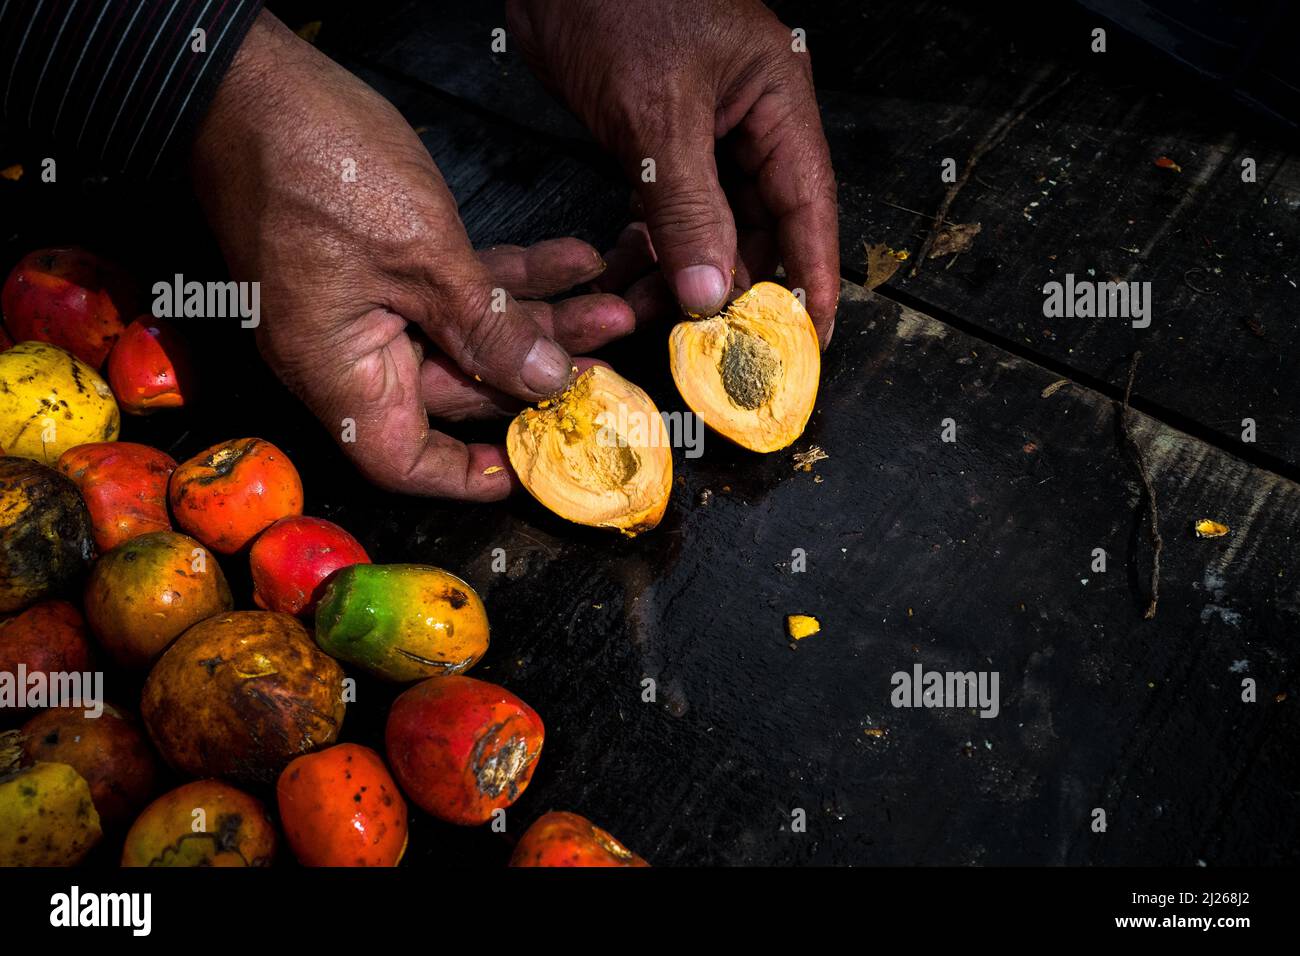 A Colombian vendor shows a halved chontaduro (peach palm) fruit in the street market in Popayán, Cauca, Colombia. Stock Photo